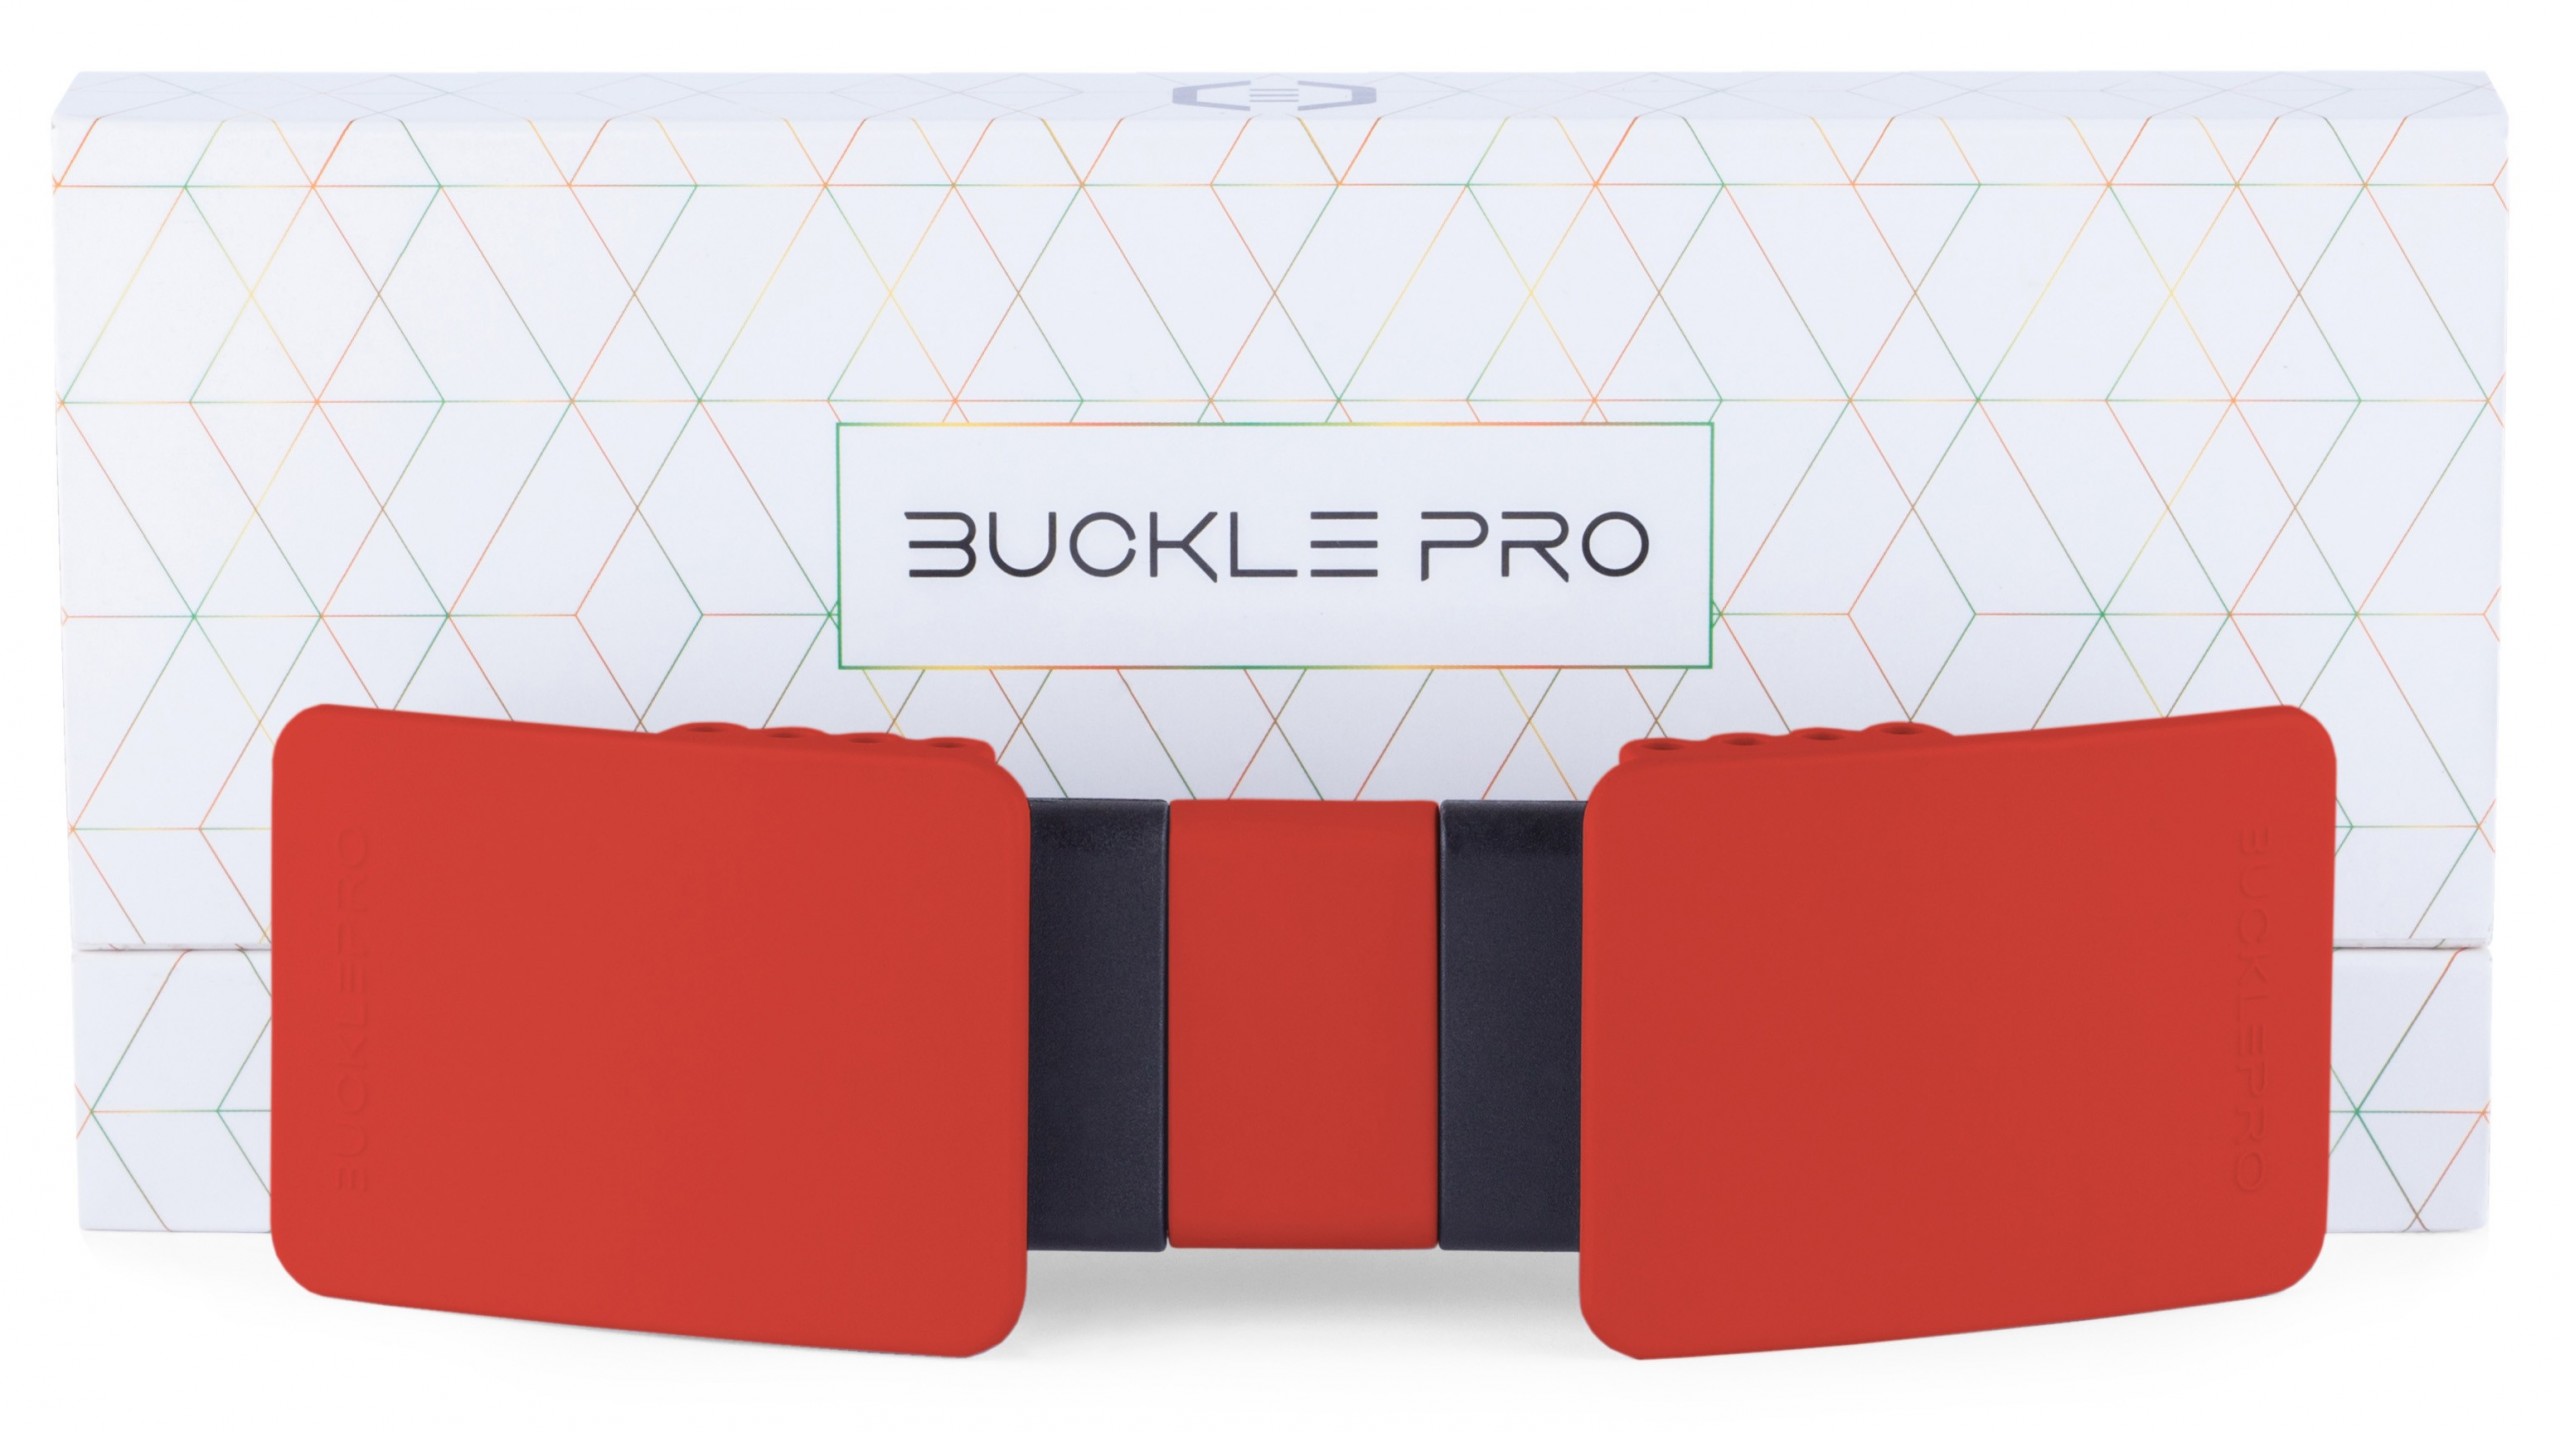 Buckle Pro – An innovative product to make your life easier